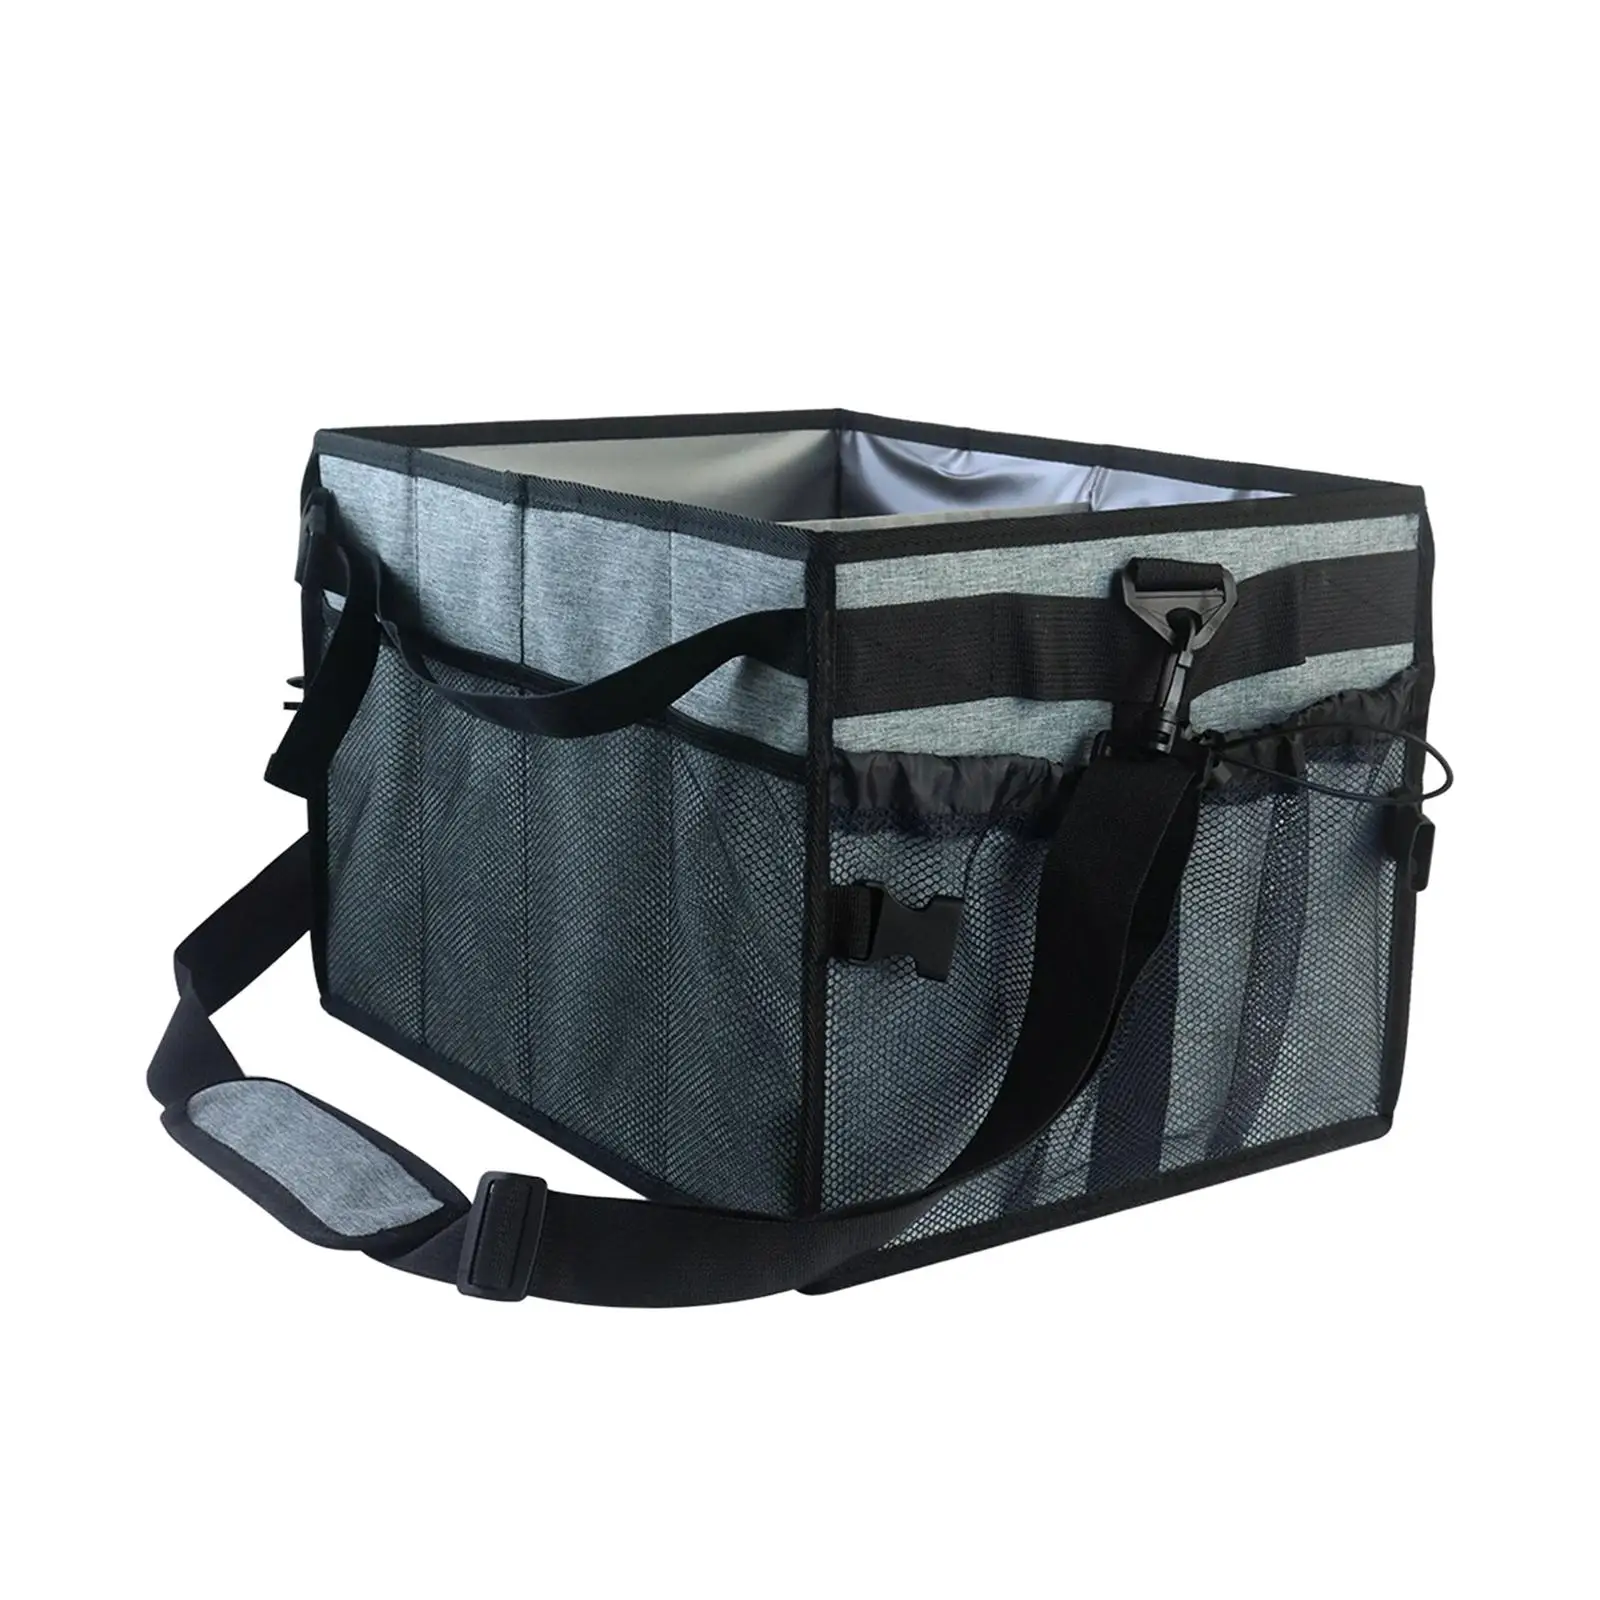 BBQ Tool Storage Bags Waterproof Foldable Large Capacity Basket for Grilling